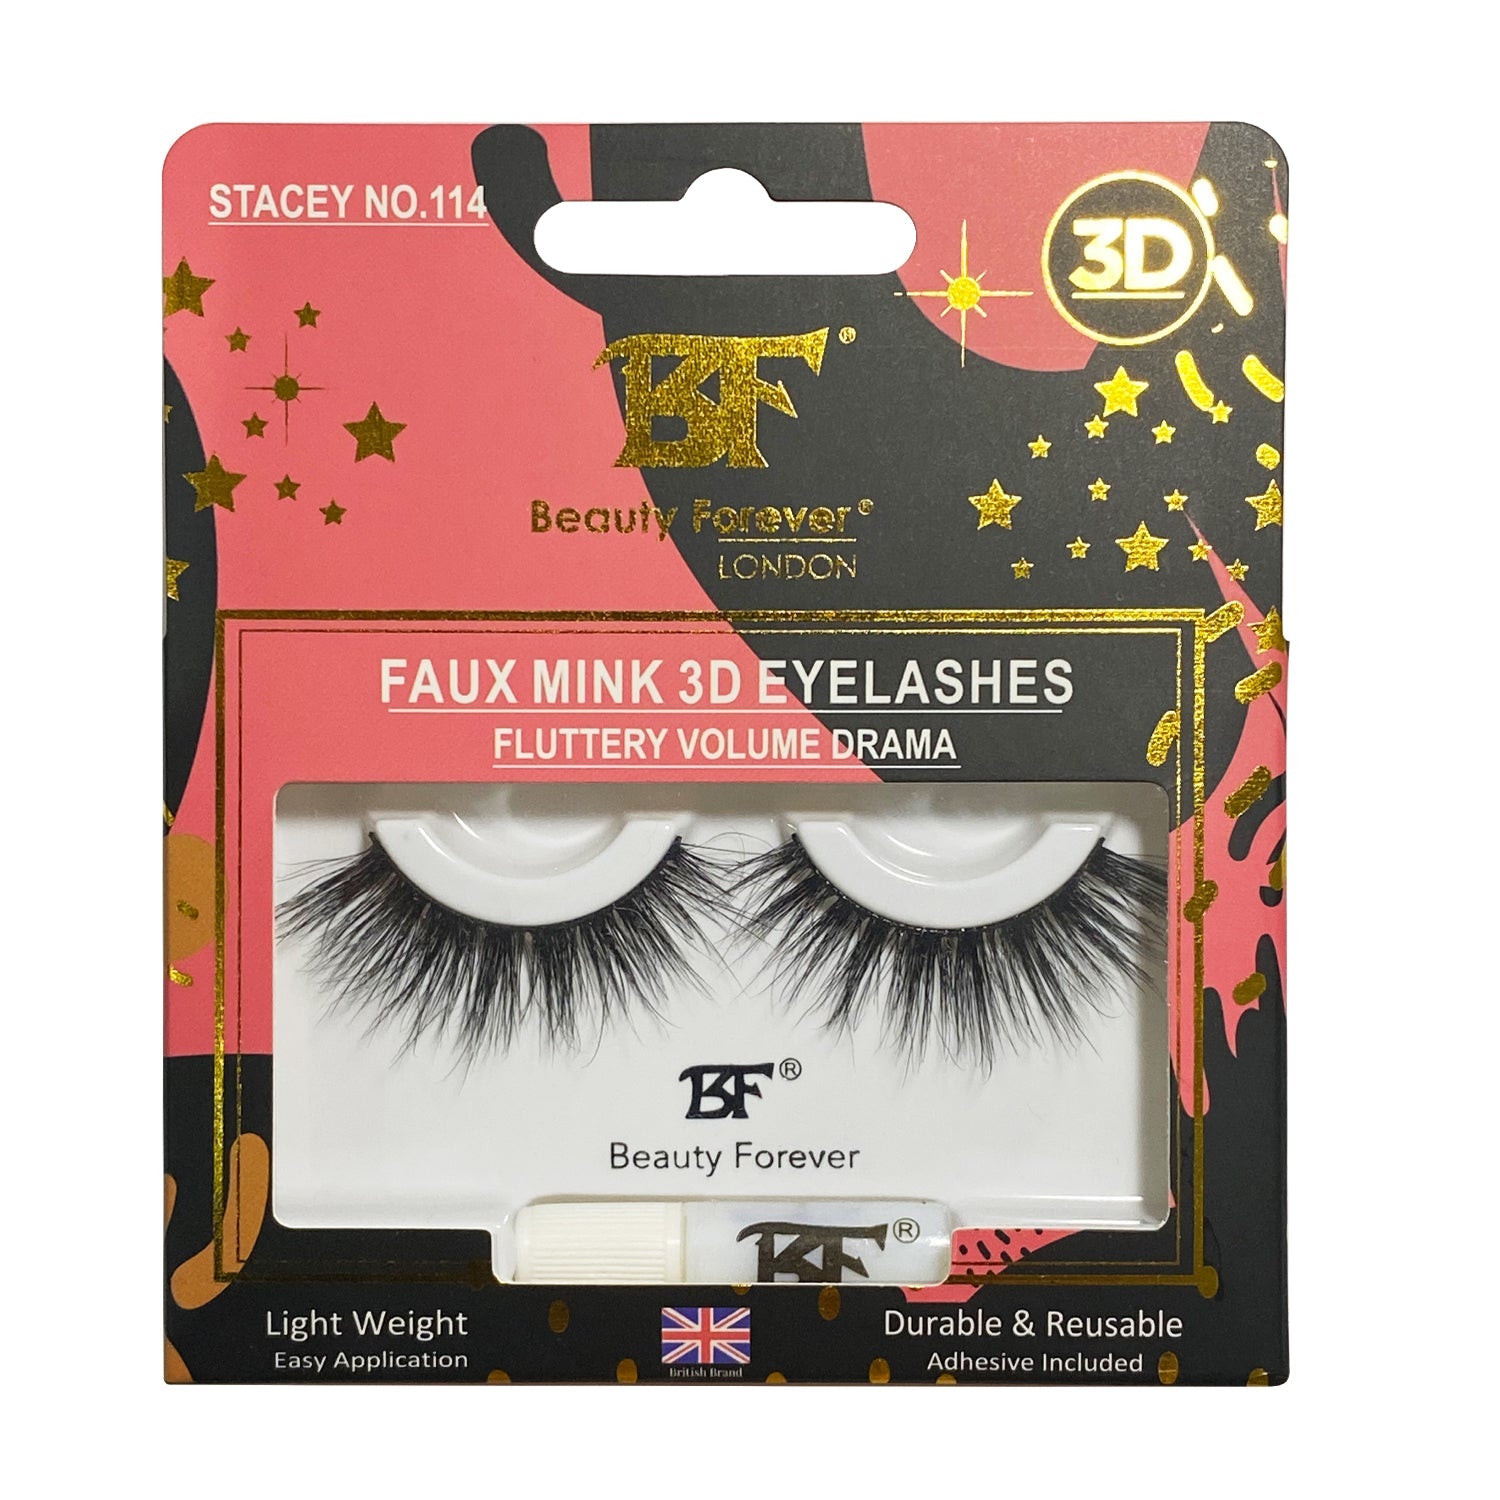 Faux Mink 3D Eyelashes Stacey No. 114 (Fluttery volume) - Beauty Forever London